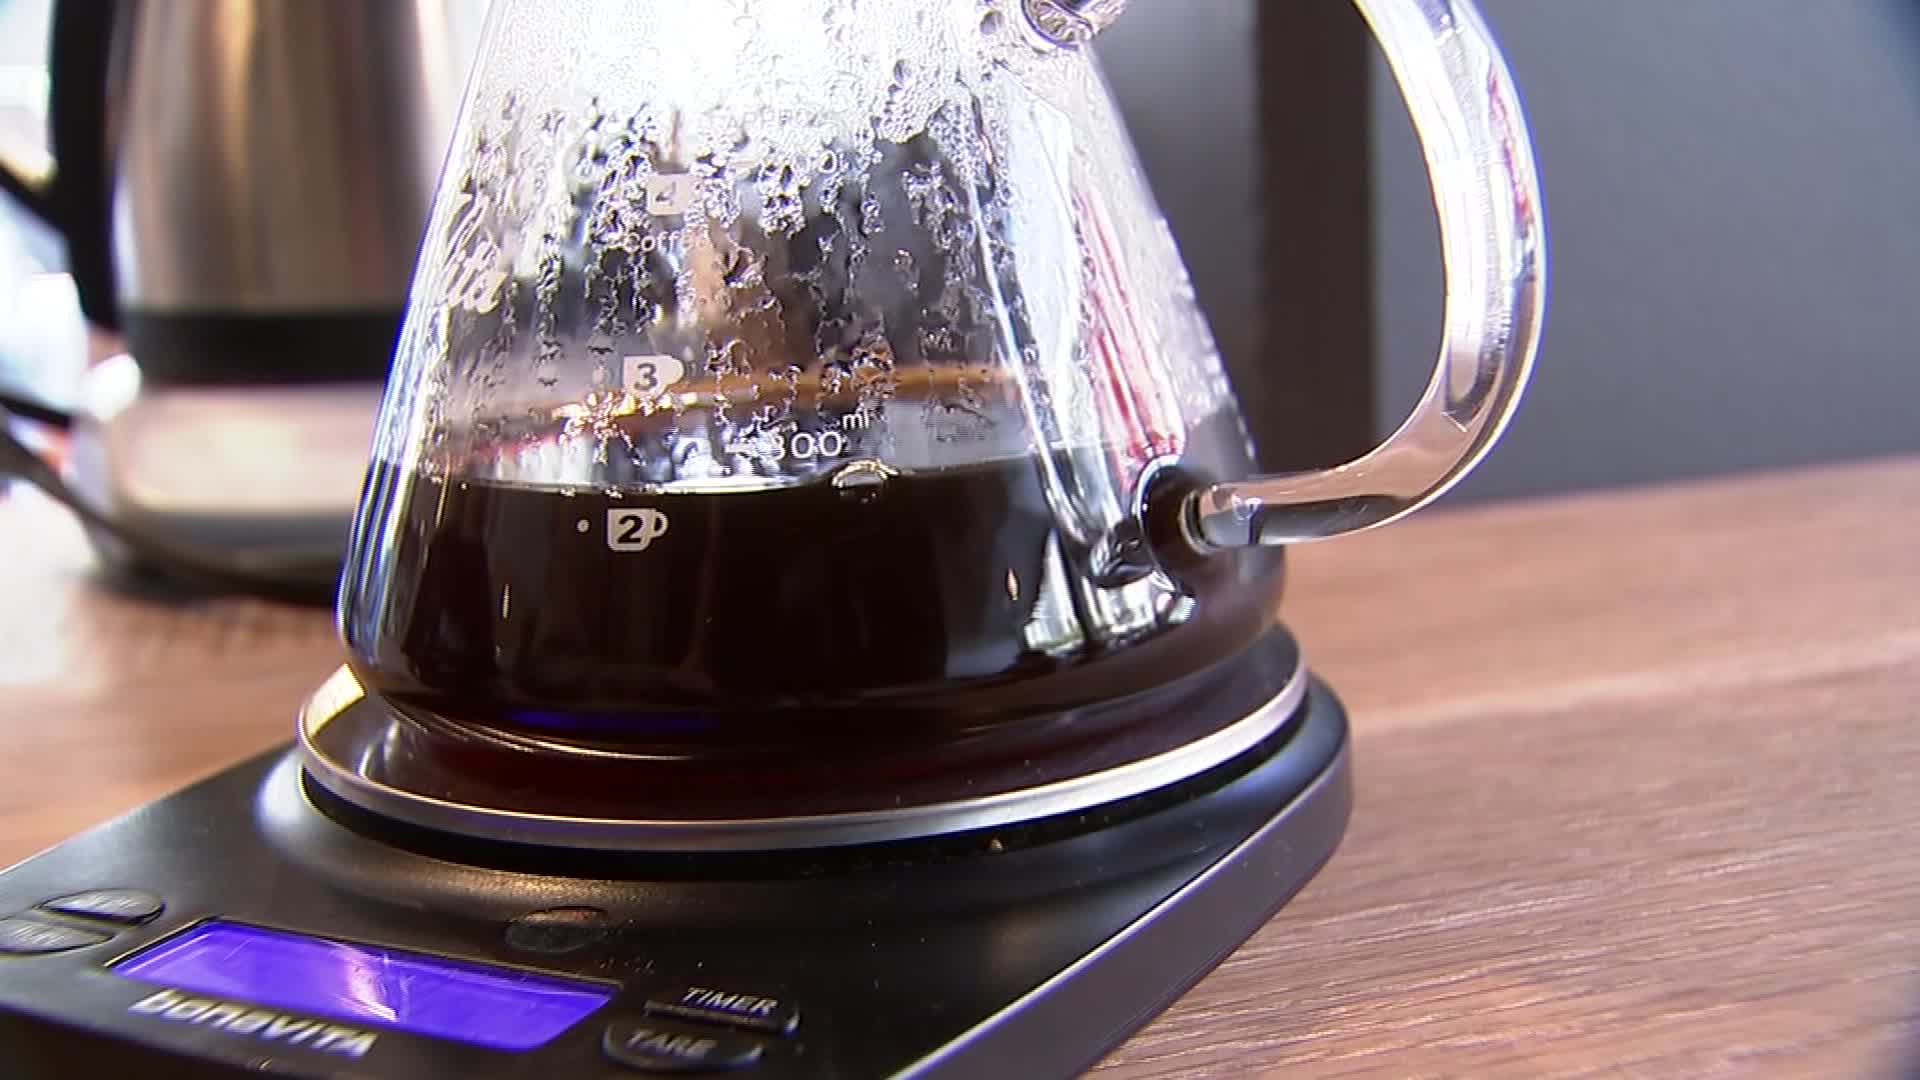 The World's Most Expensive Cup of Coffee